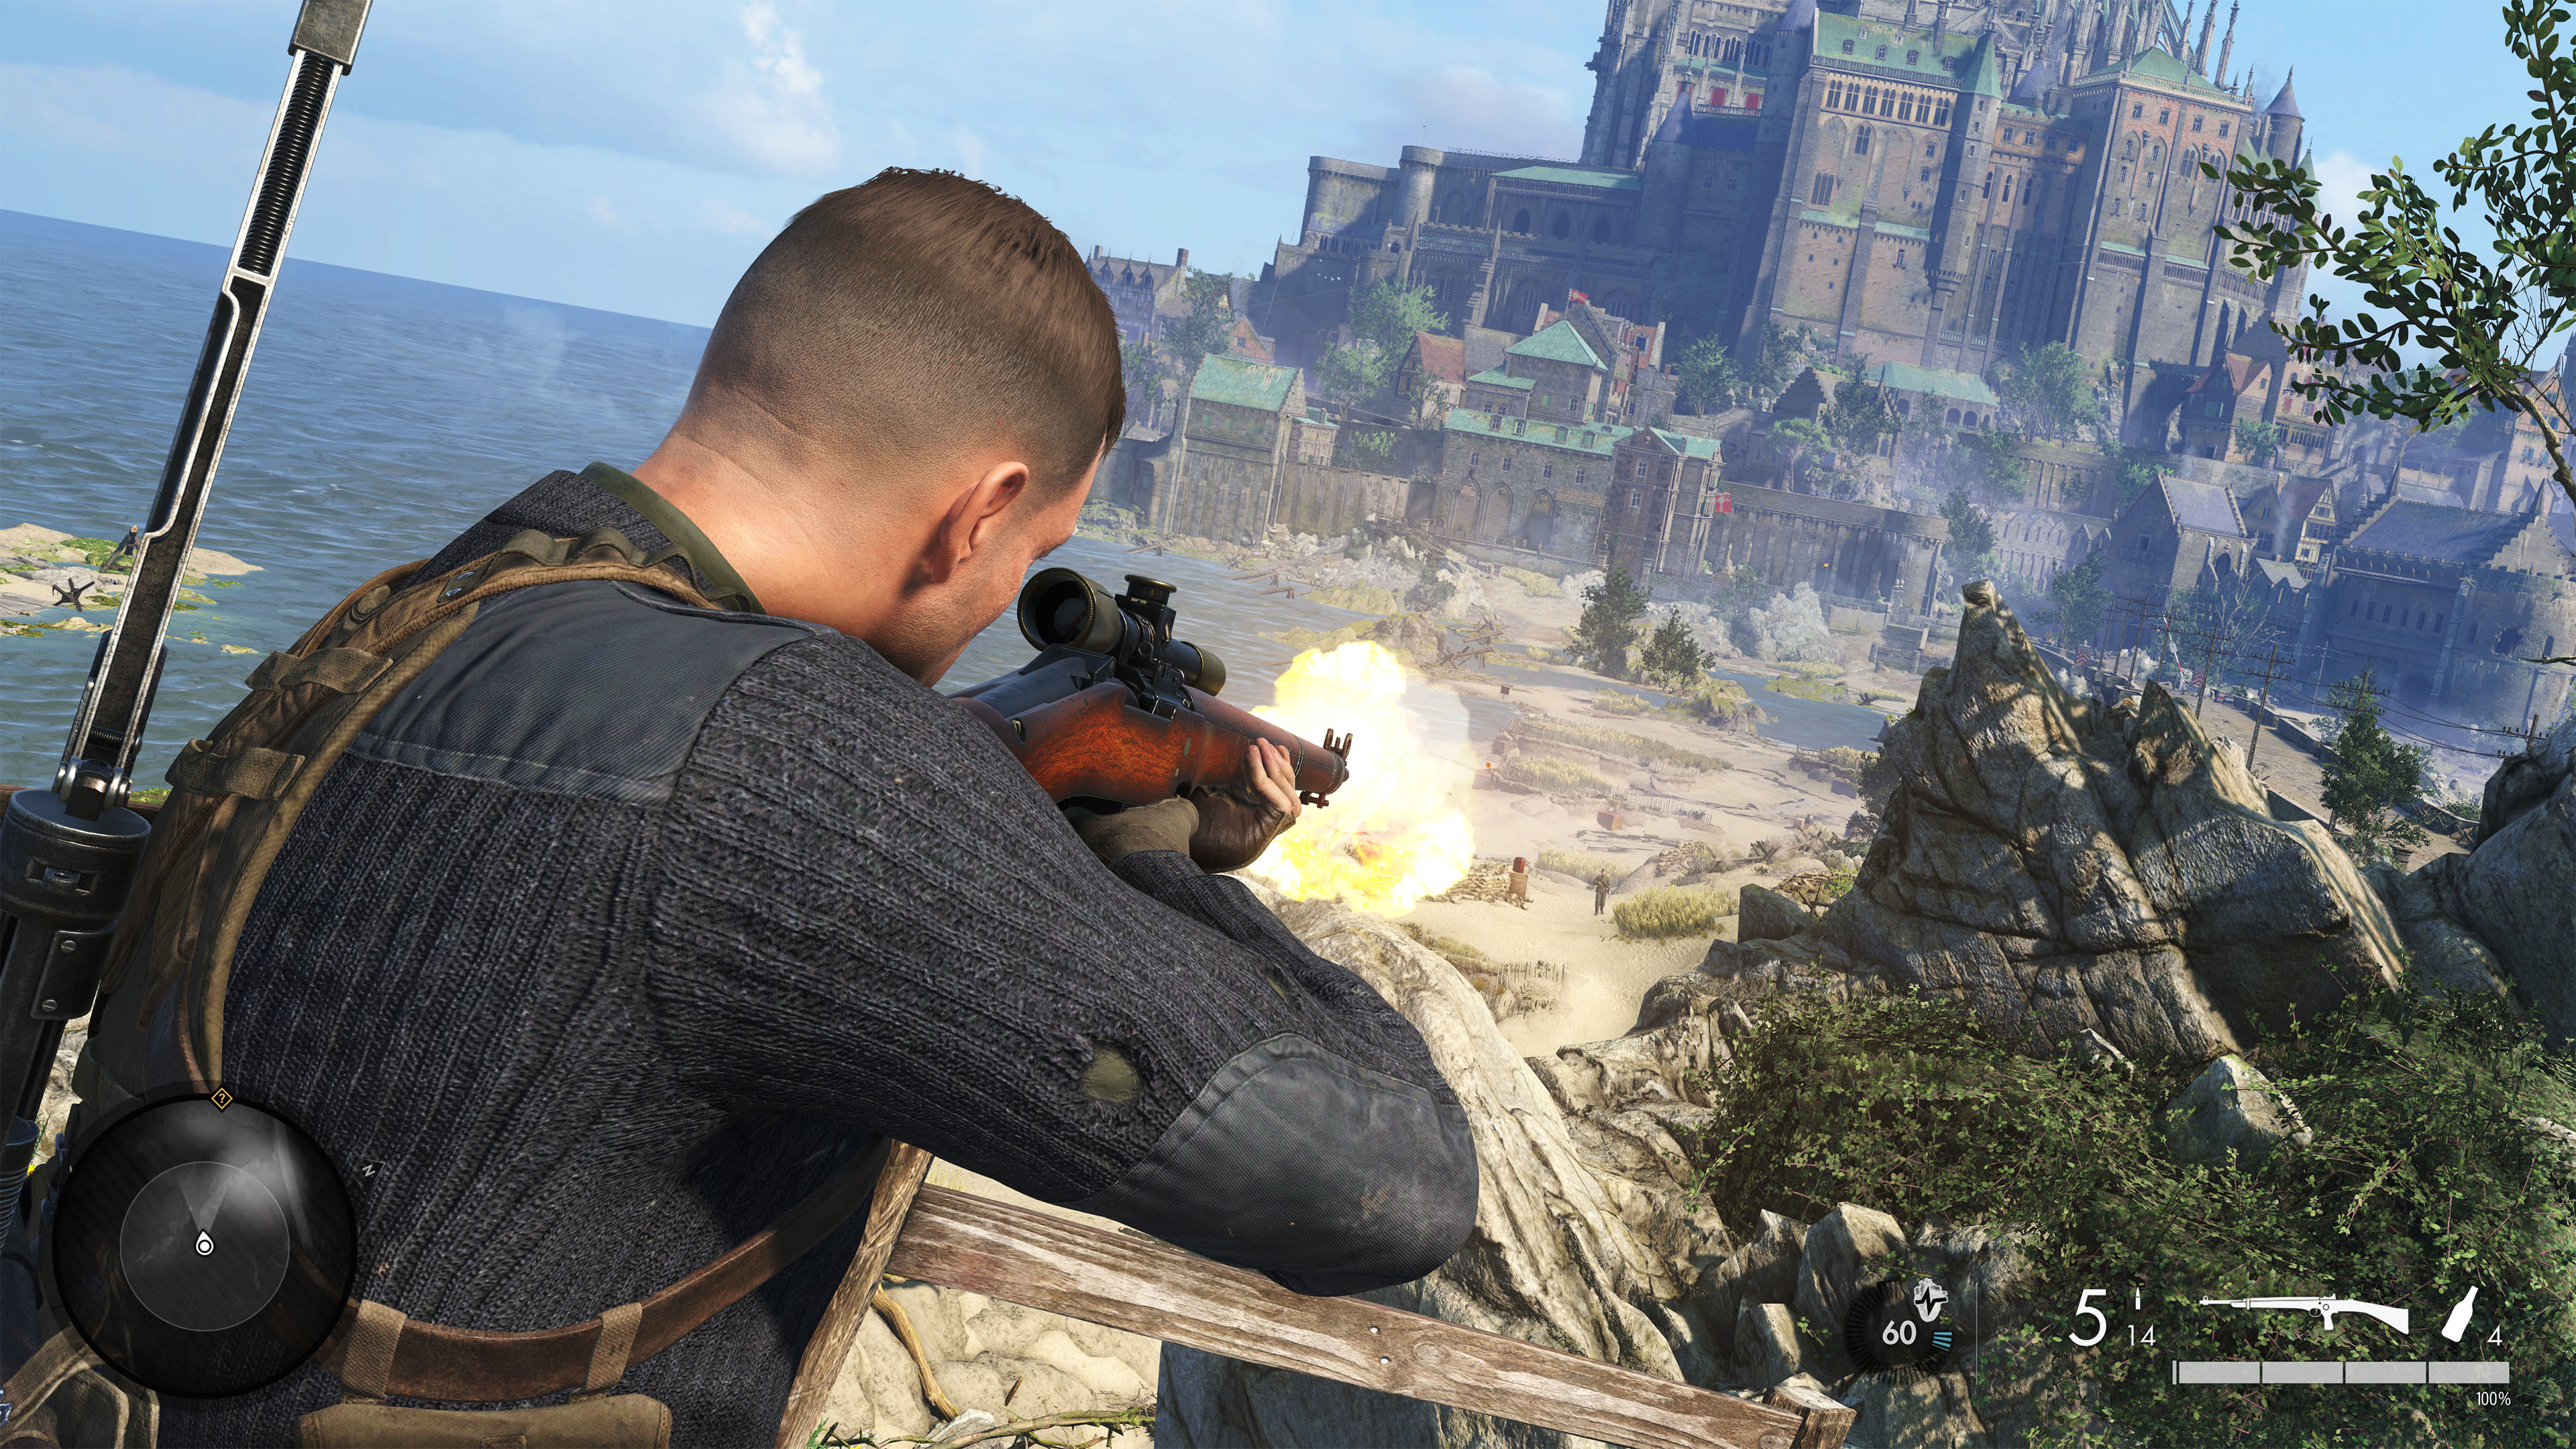 10 Sniper Elite 5 tips to know before you play